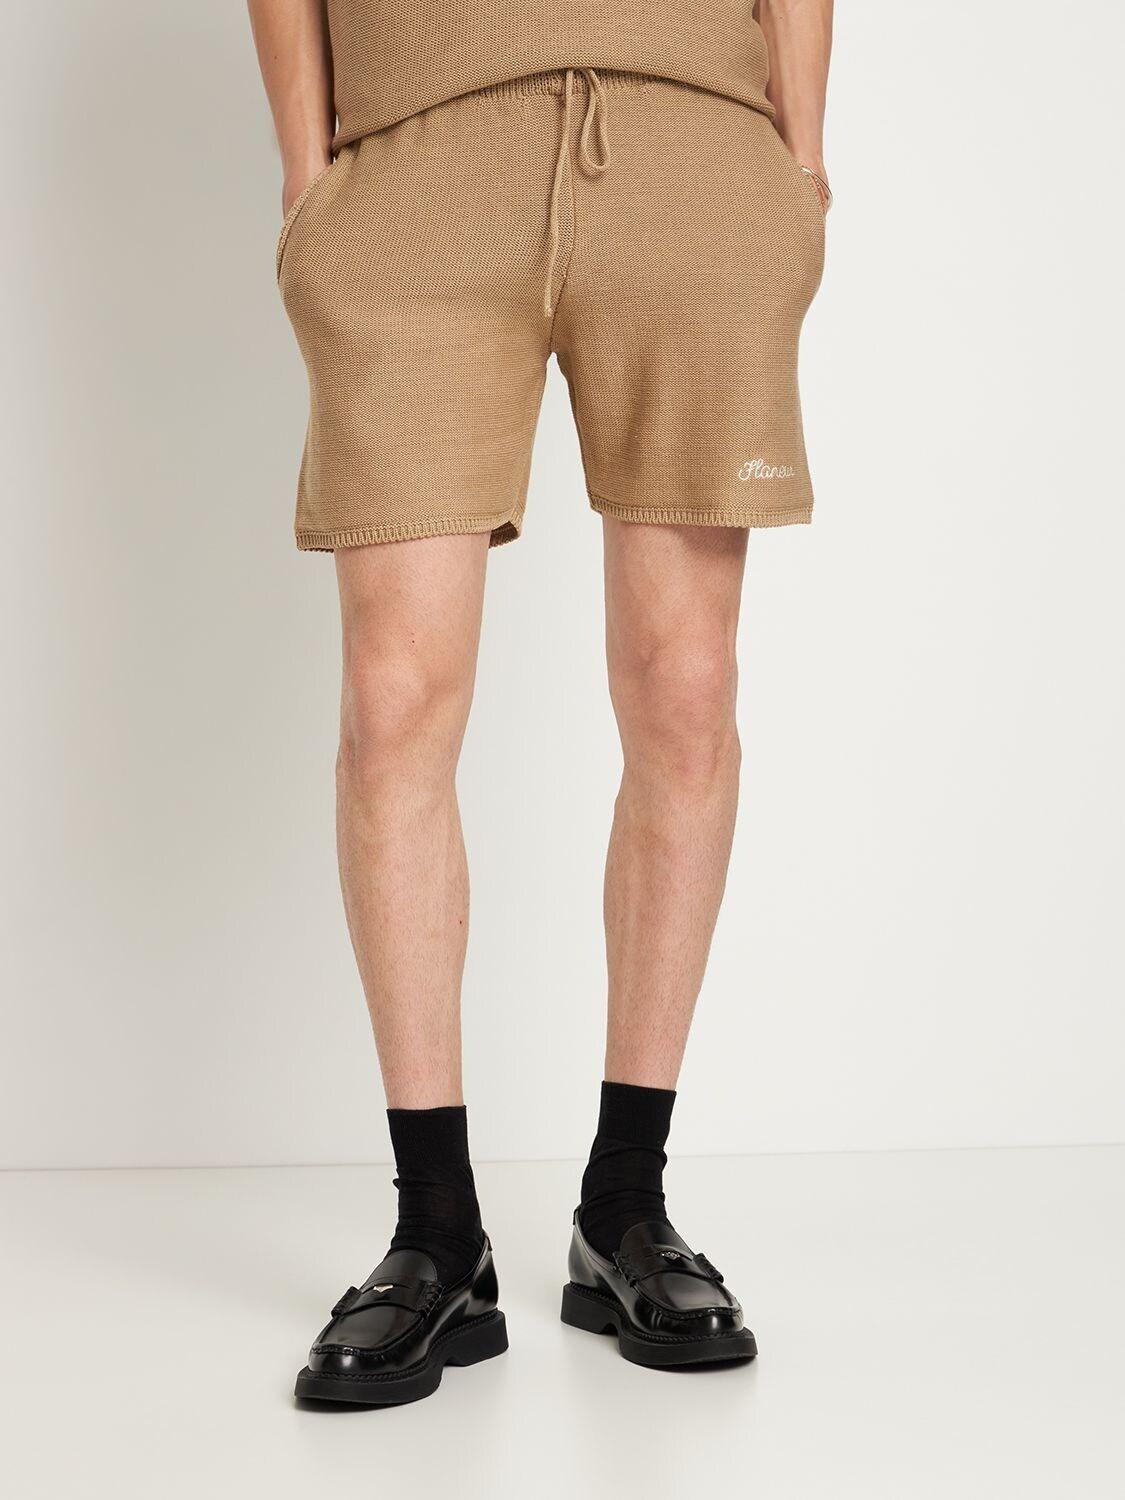 FLANEUR HOMME Cotton Blend Knitted Shorts in Brown for Men | Lyst